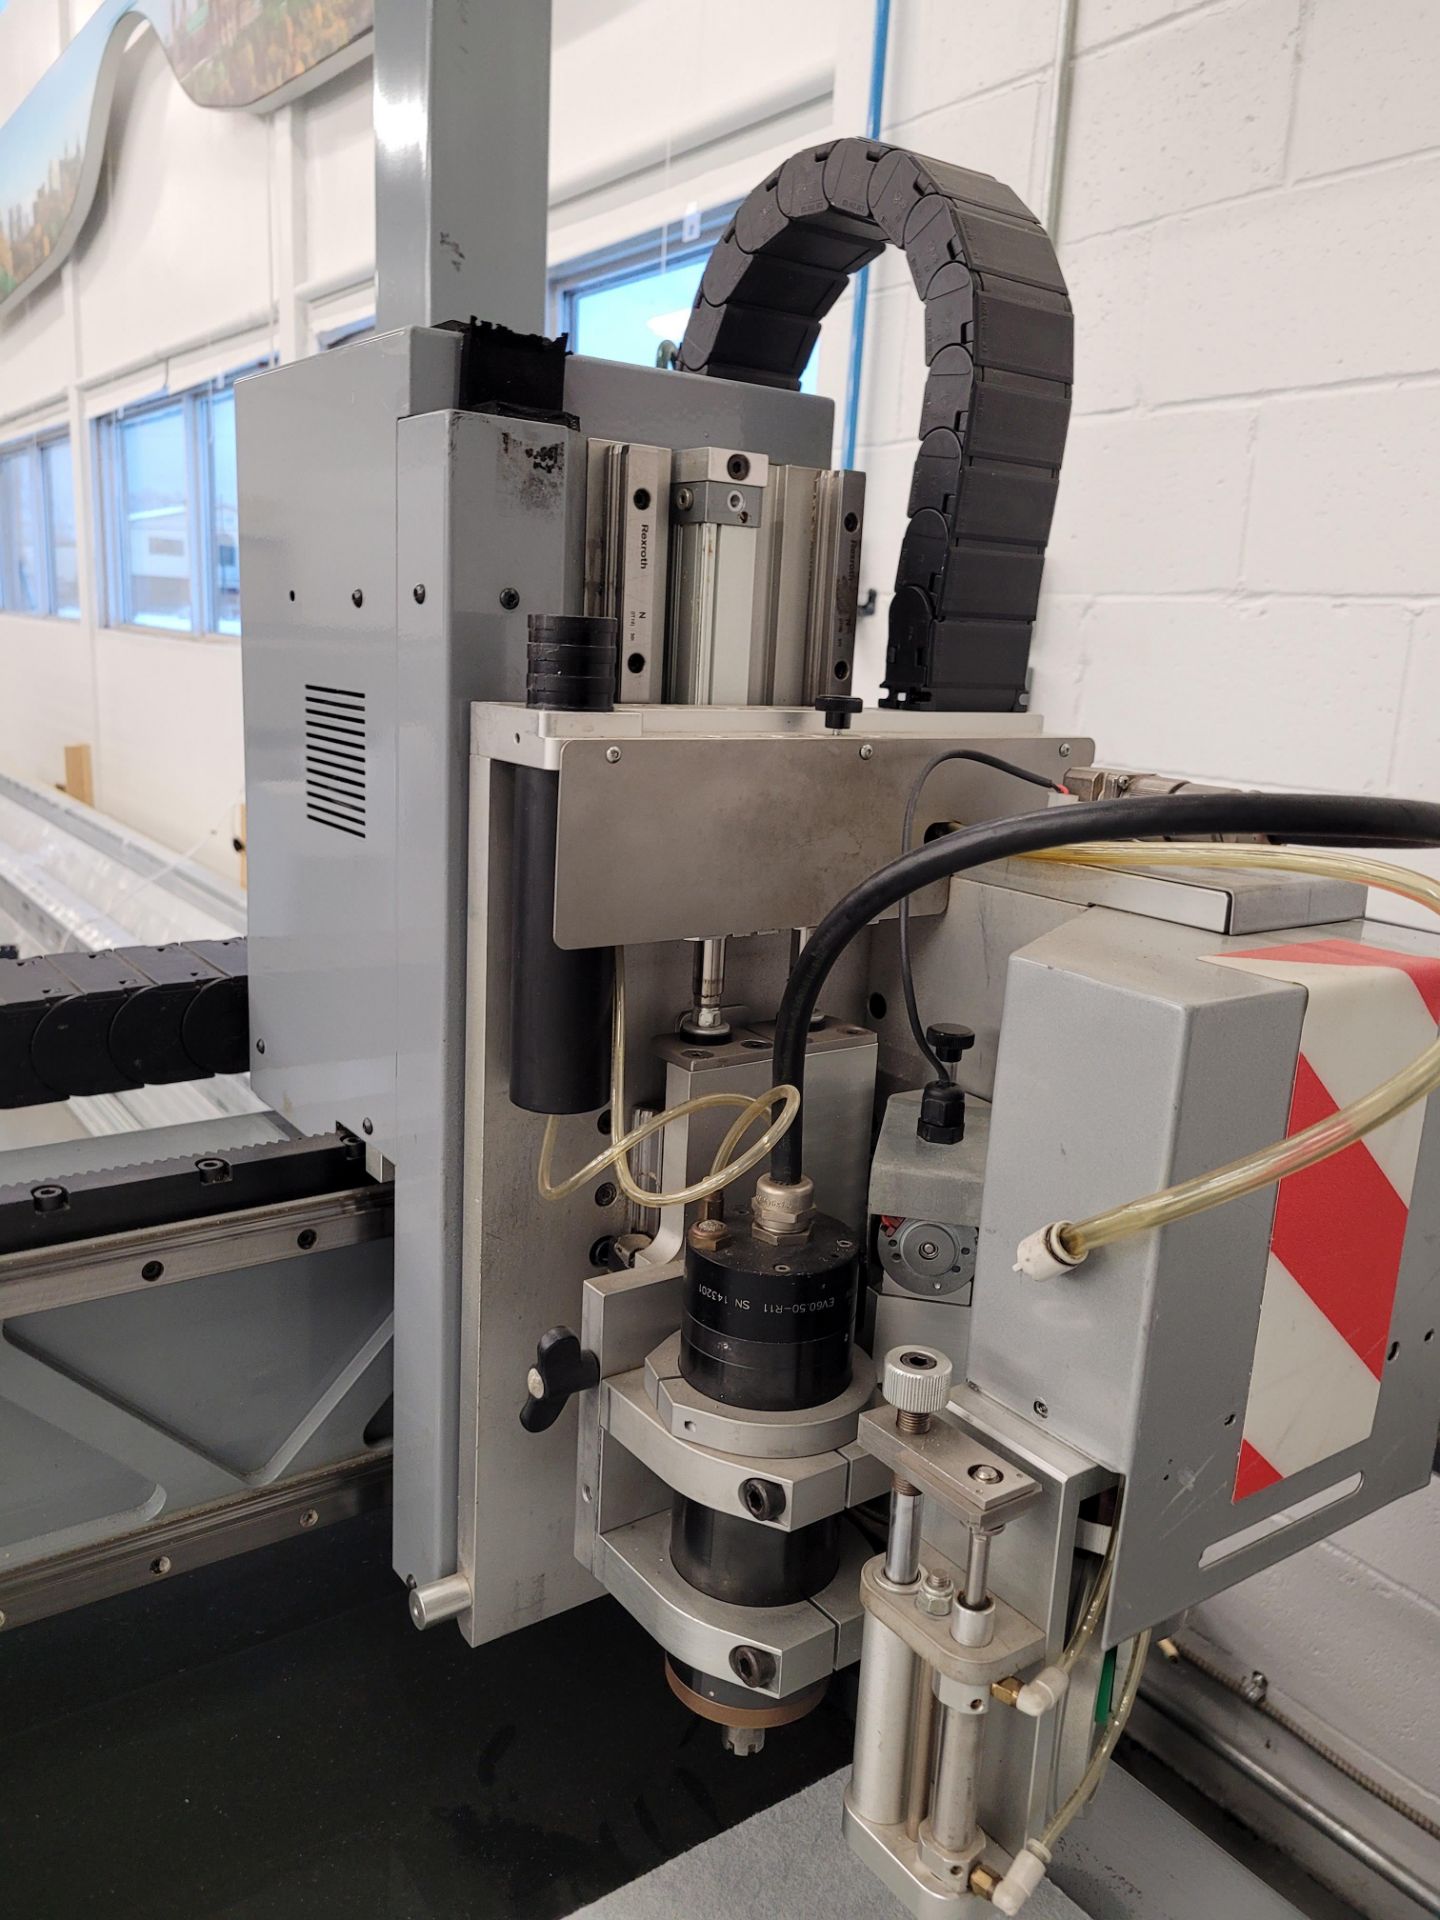 2014 ELITRON CAM mod. Kombo 3120 SD Automatic Cutting System, ser. 303141683G, 3PH, with air tank an - Image 10 of 46